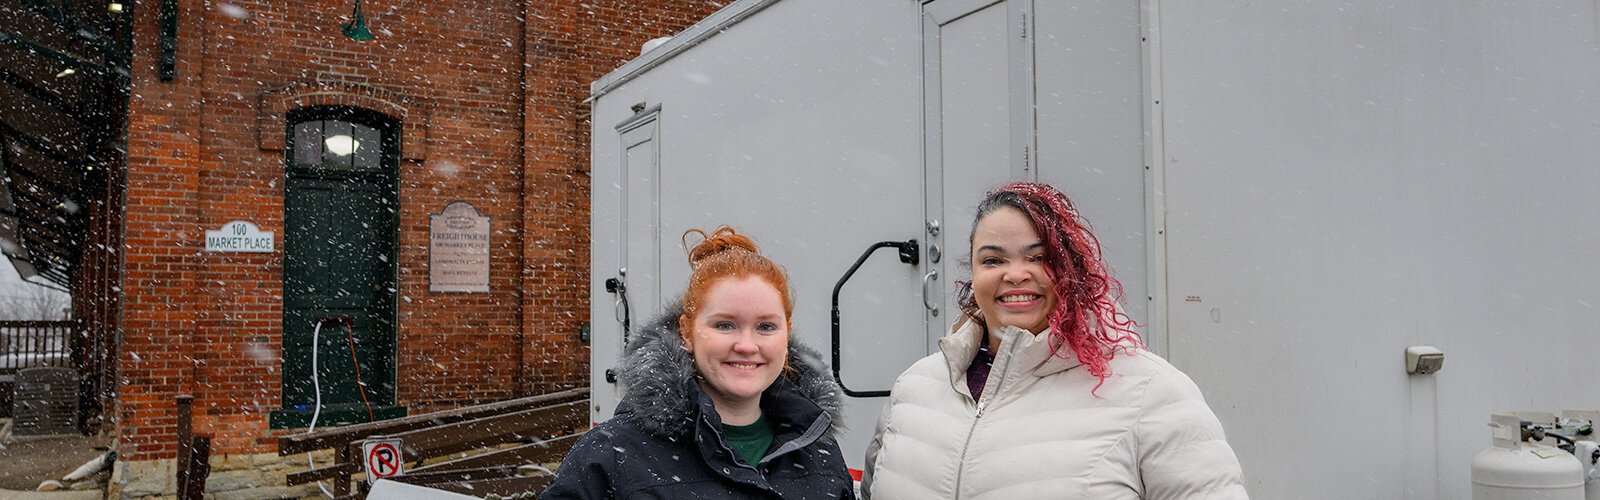 Kate Holcomb and Tajalli Hodge with the WashUp Ministries mobile shower facility at the Ypsilanti Freighthouse.